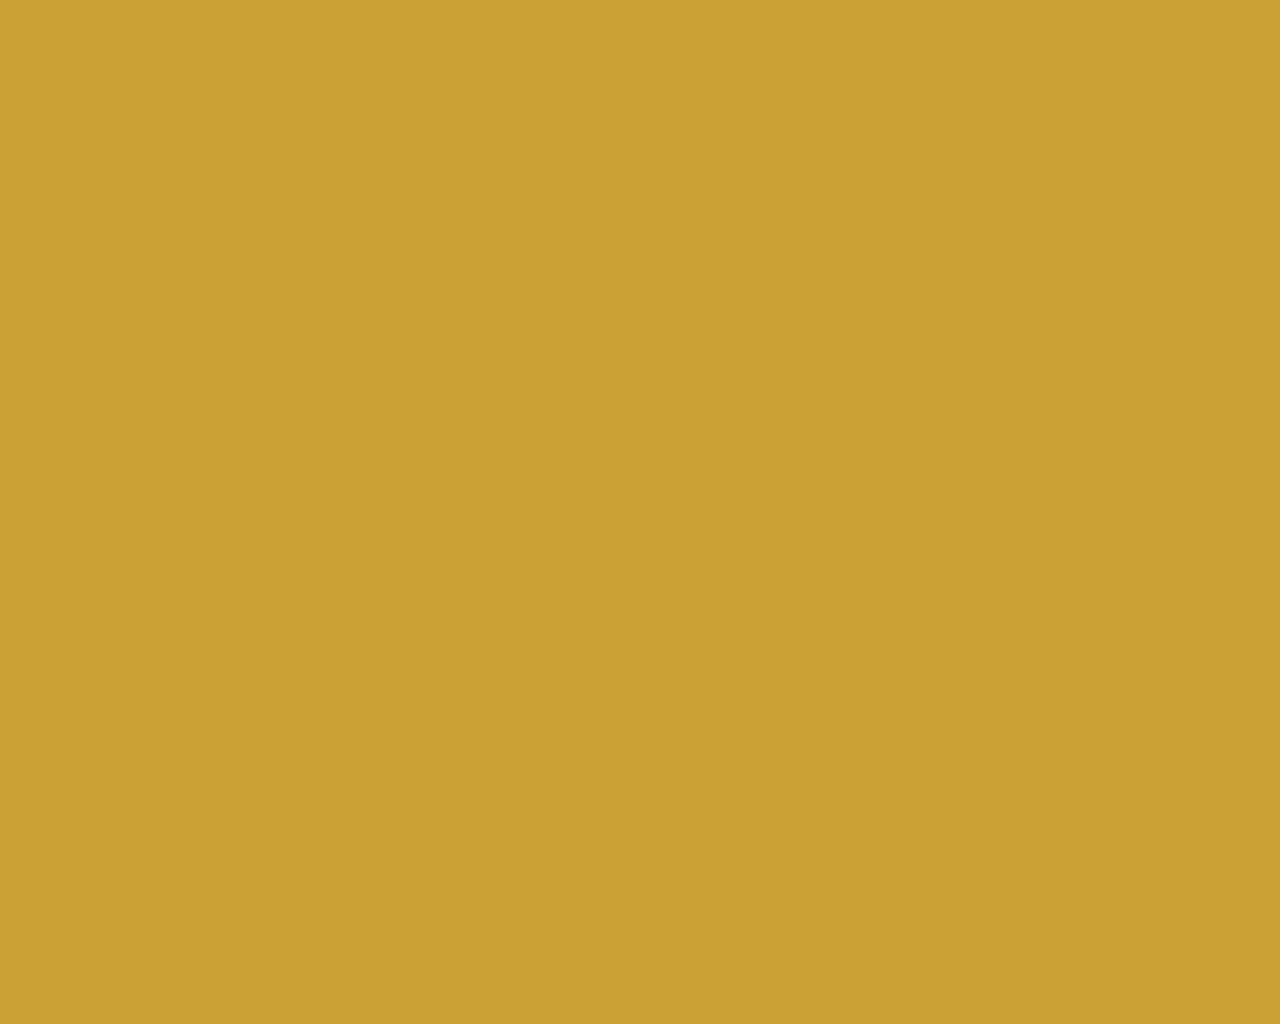 1280x1024 Satin Sheen Gold Solid Color Background